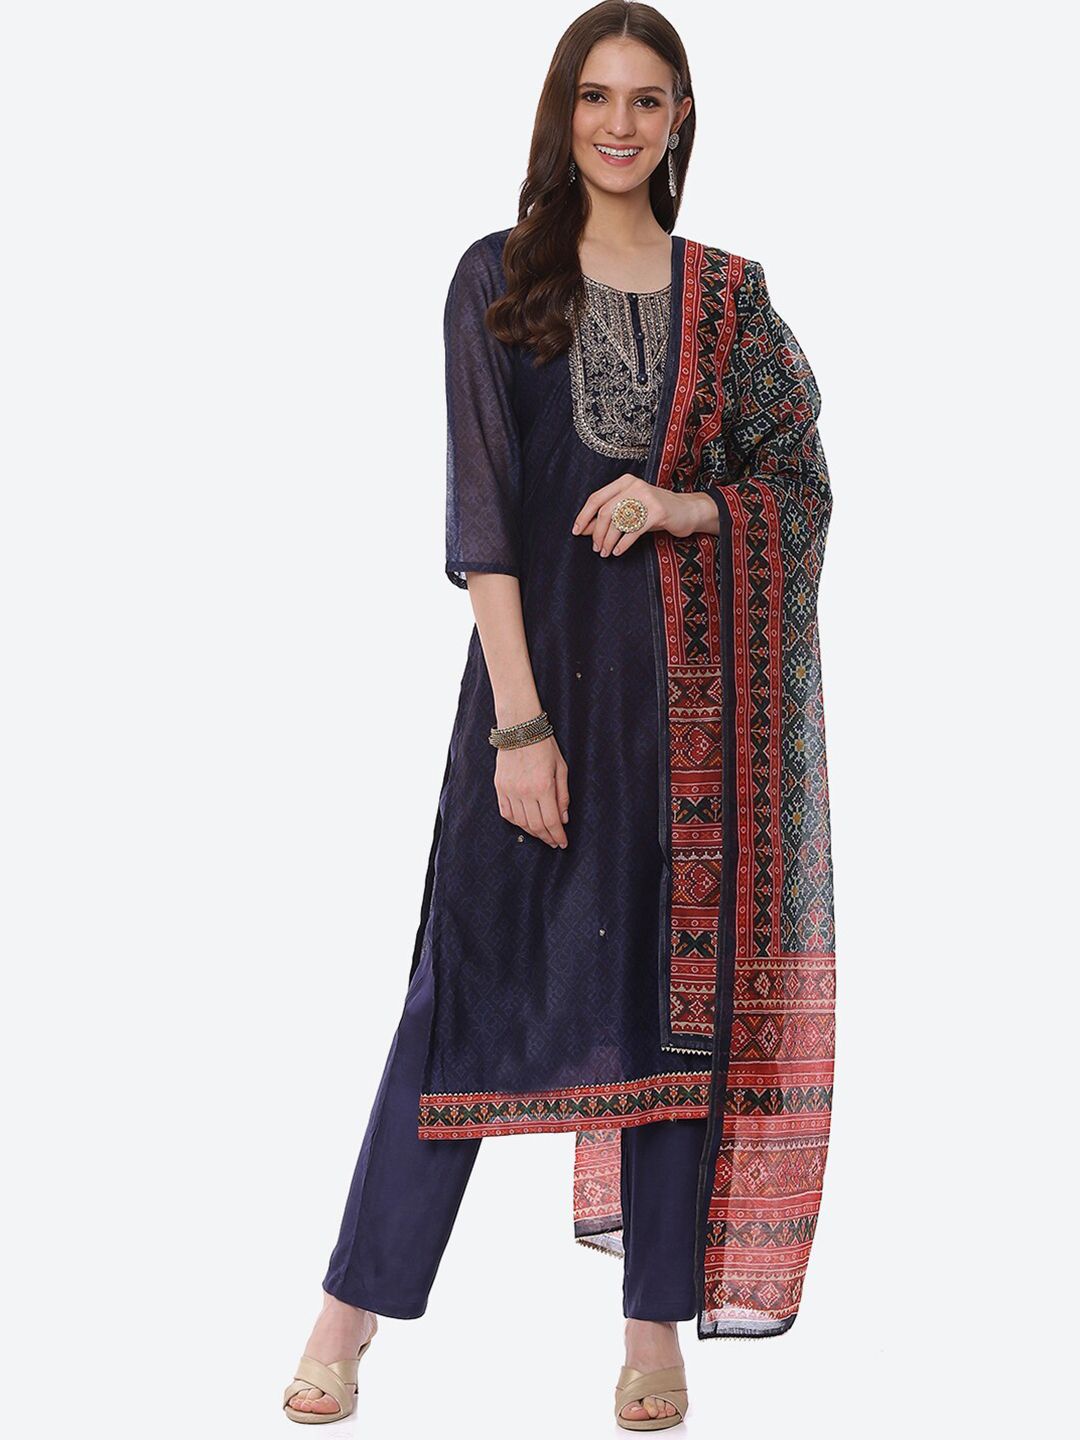 Biba Navy Blue & Maroon Printed Unstitched Dress Material Price in India